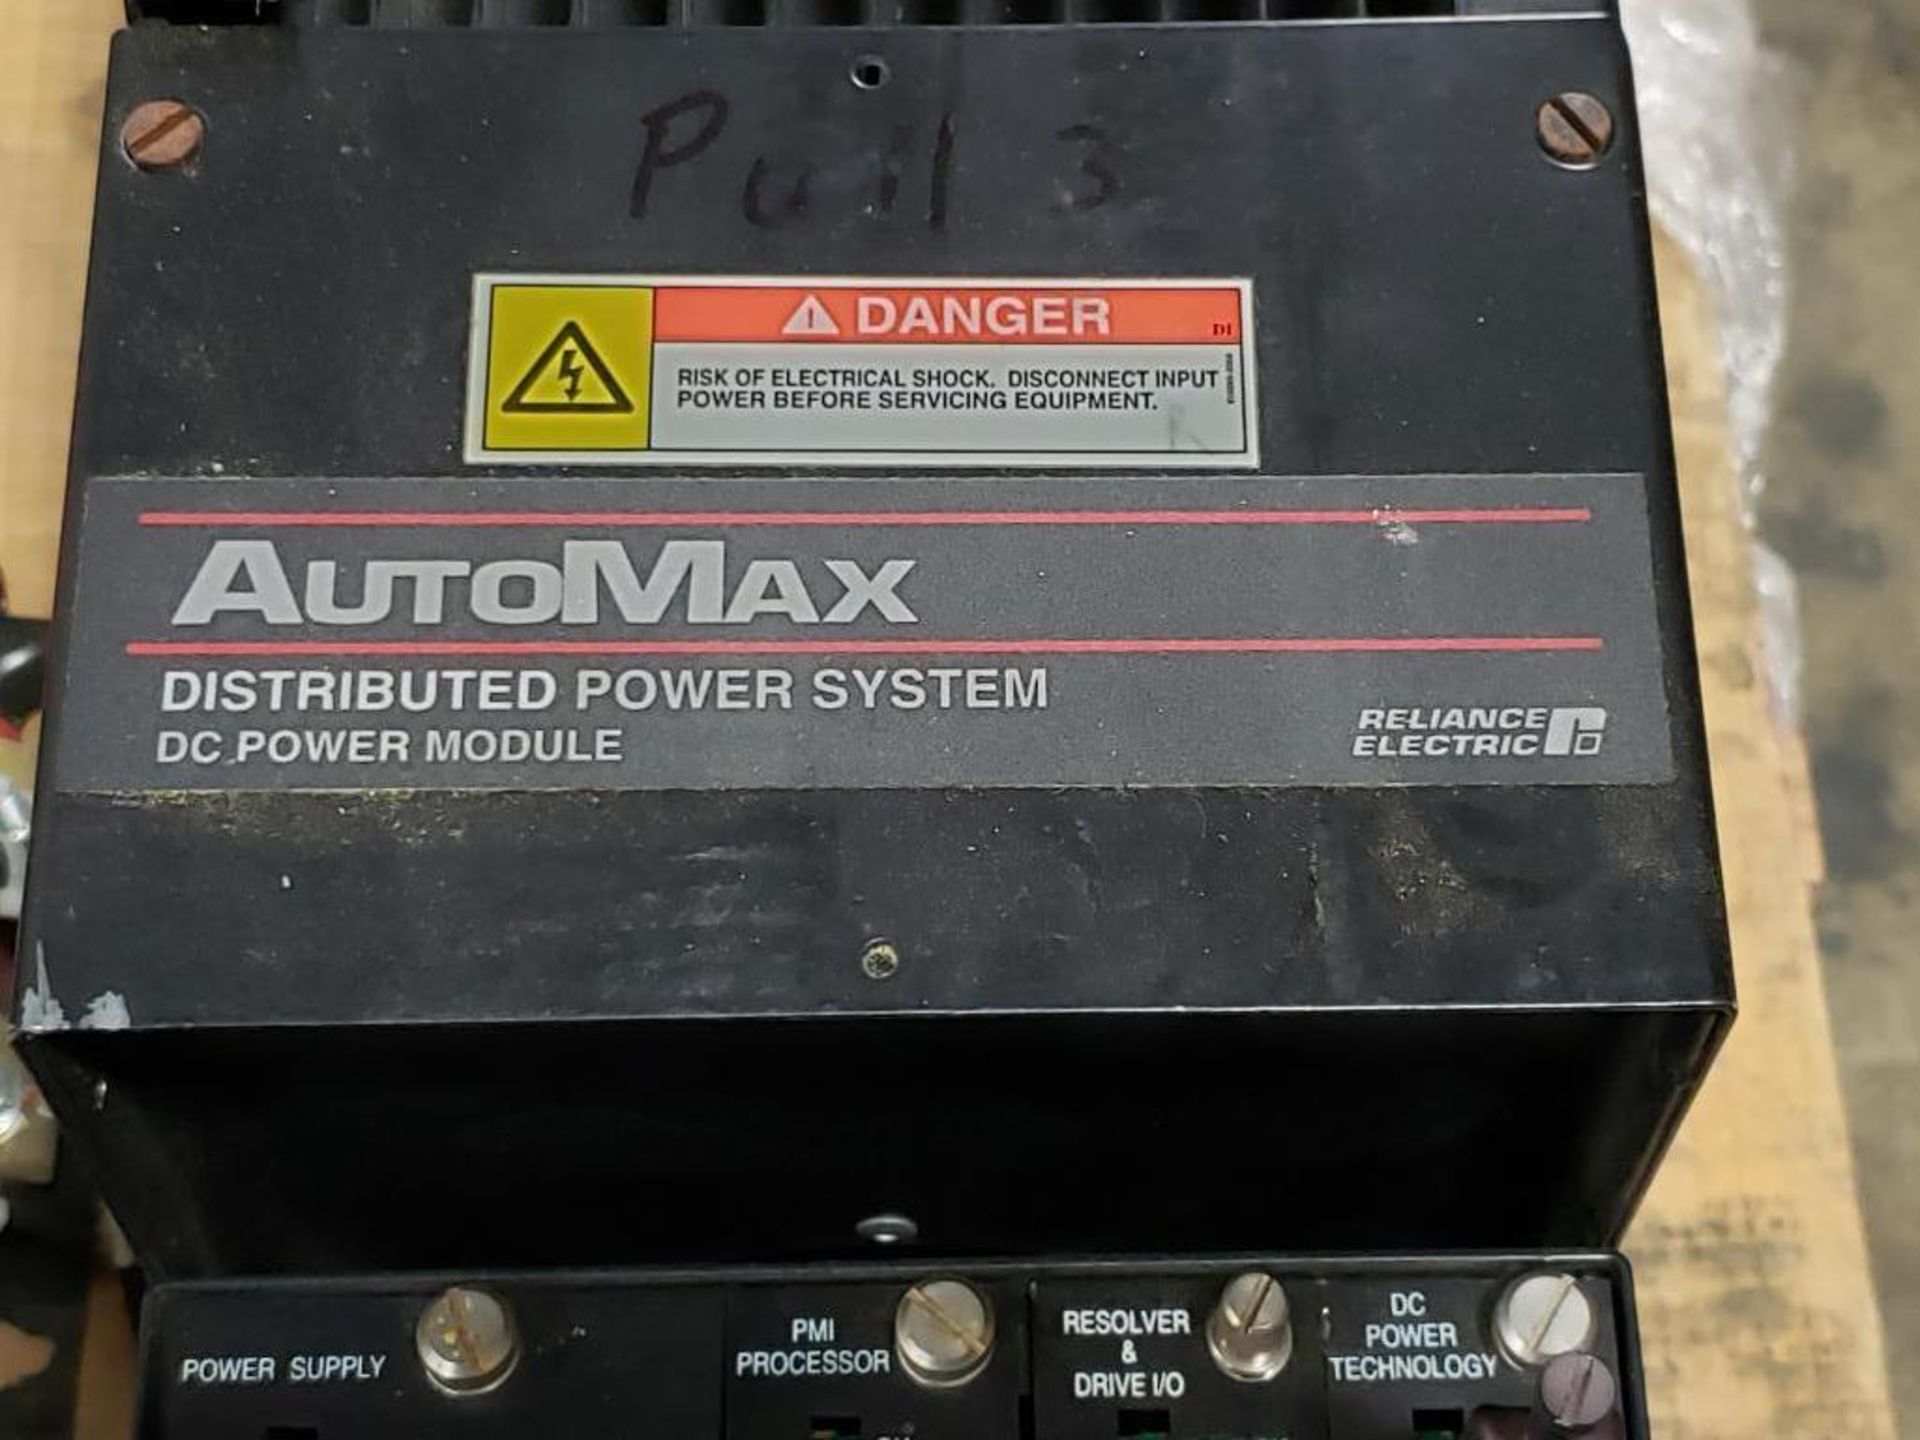 Reliance Electric Automax distributed power system SC power module. 805401-1R. S-3008. - Image 3 of 7